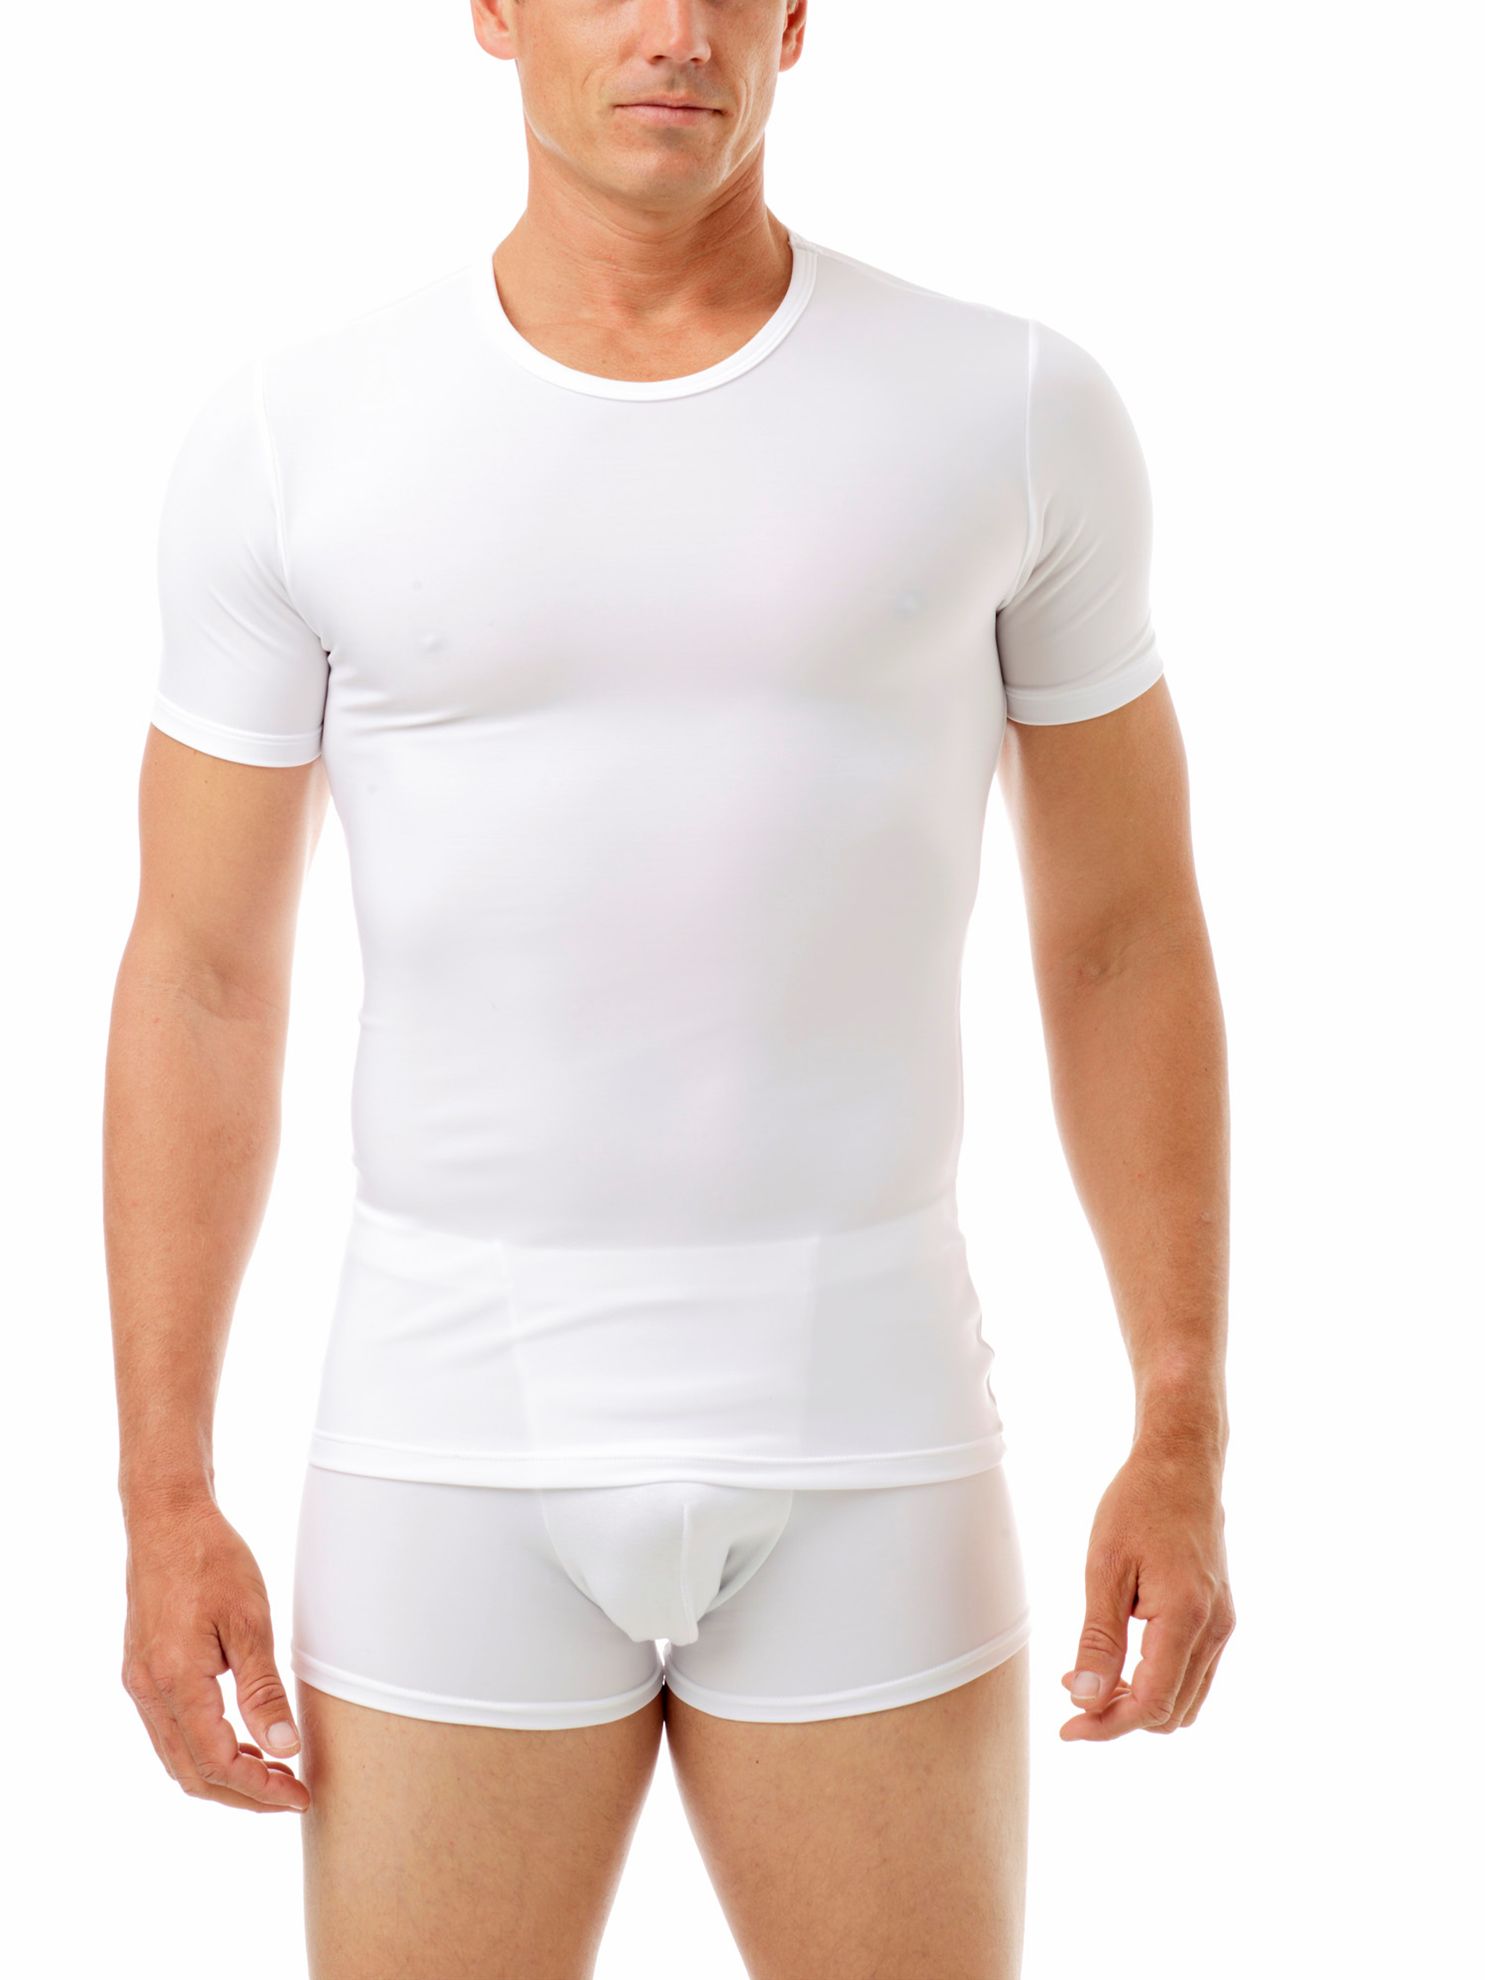 Underworks Microfiber Compression Crew Neck T-shirt with Short Sleeves -  White - XS